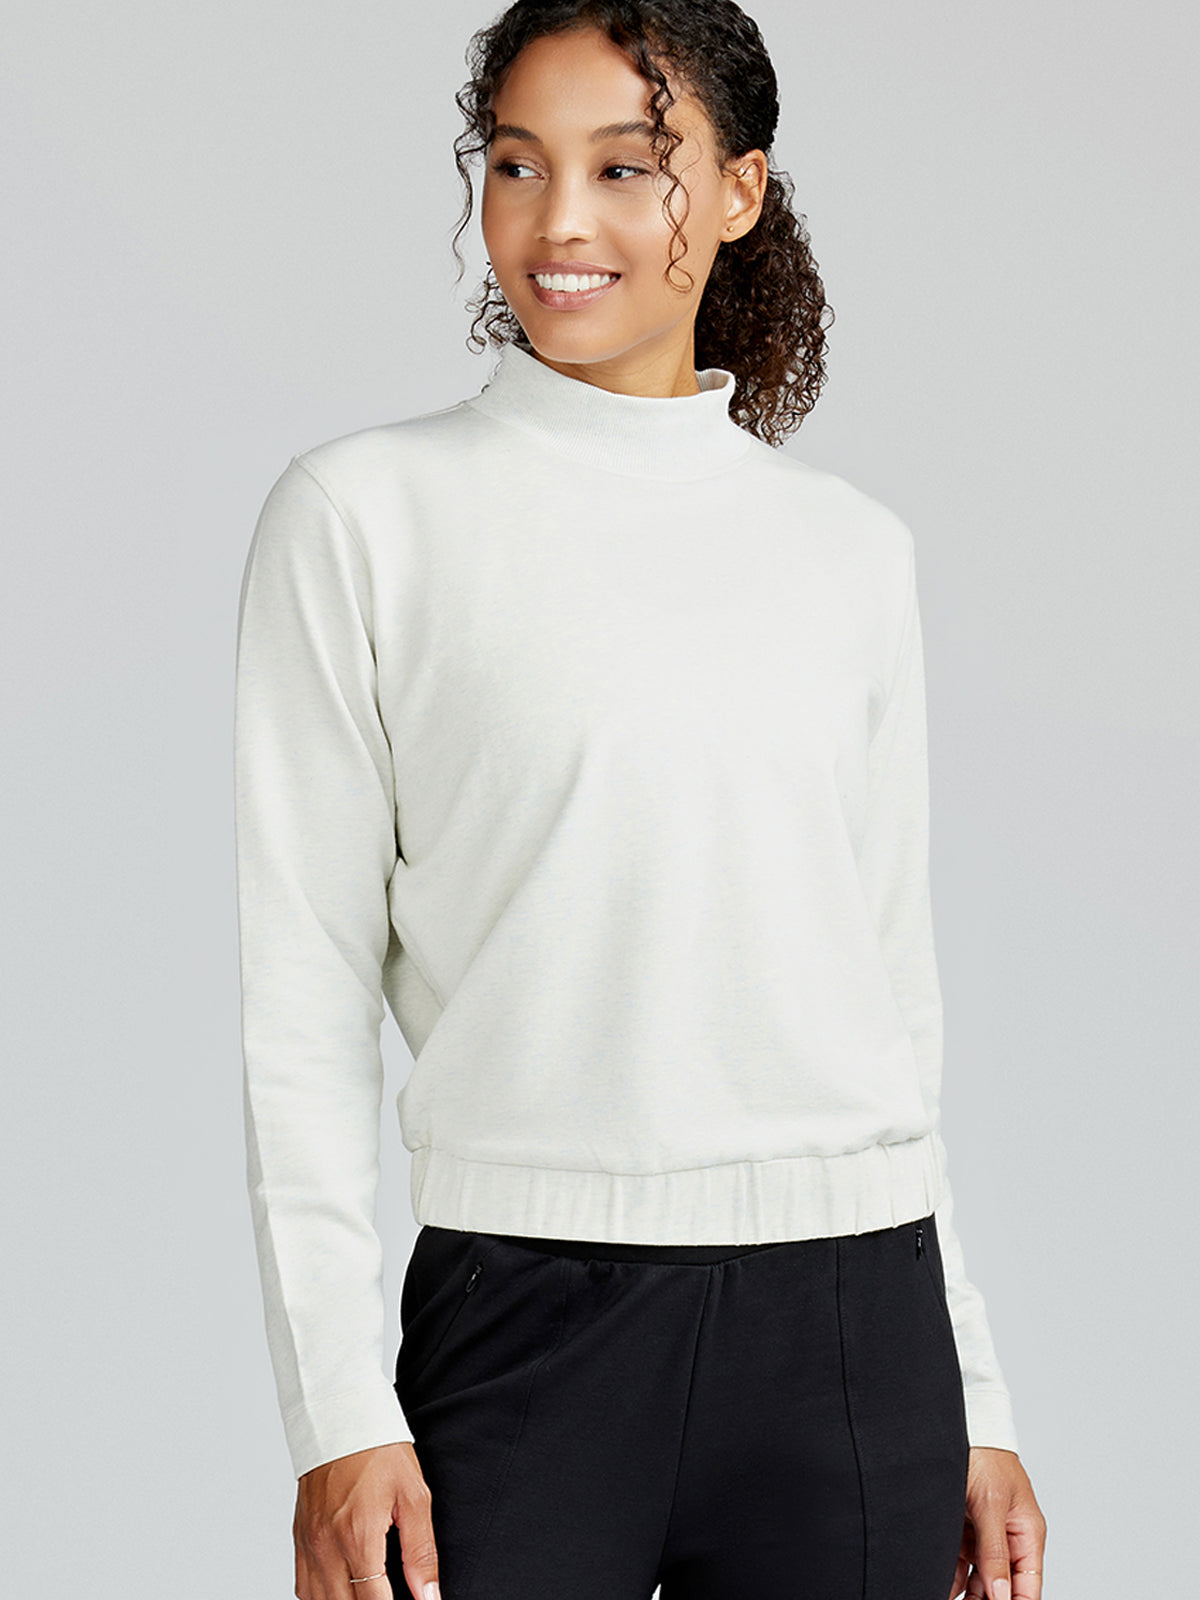 THE GYM PEOPLE Women's Basic Pullover Hoodie Togo